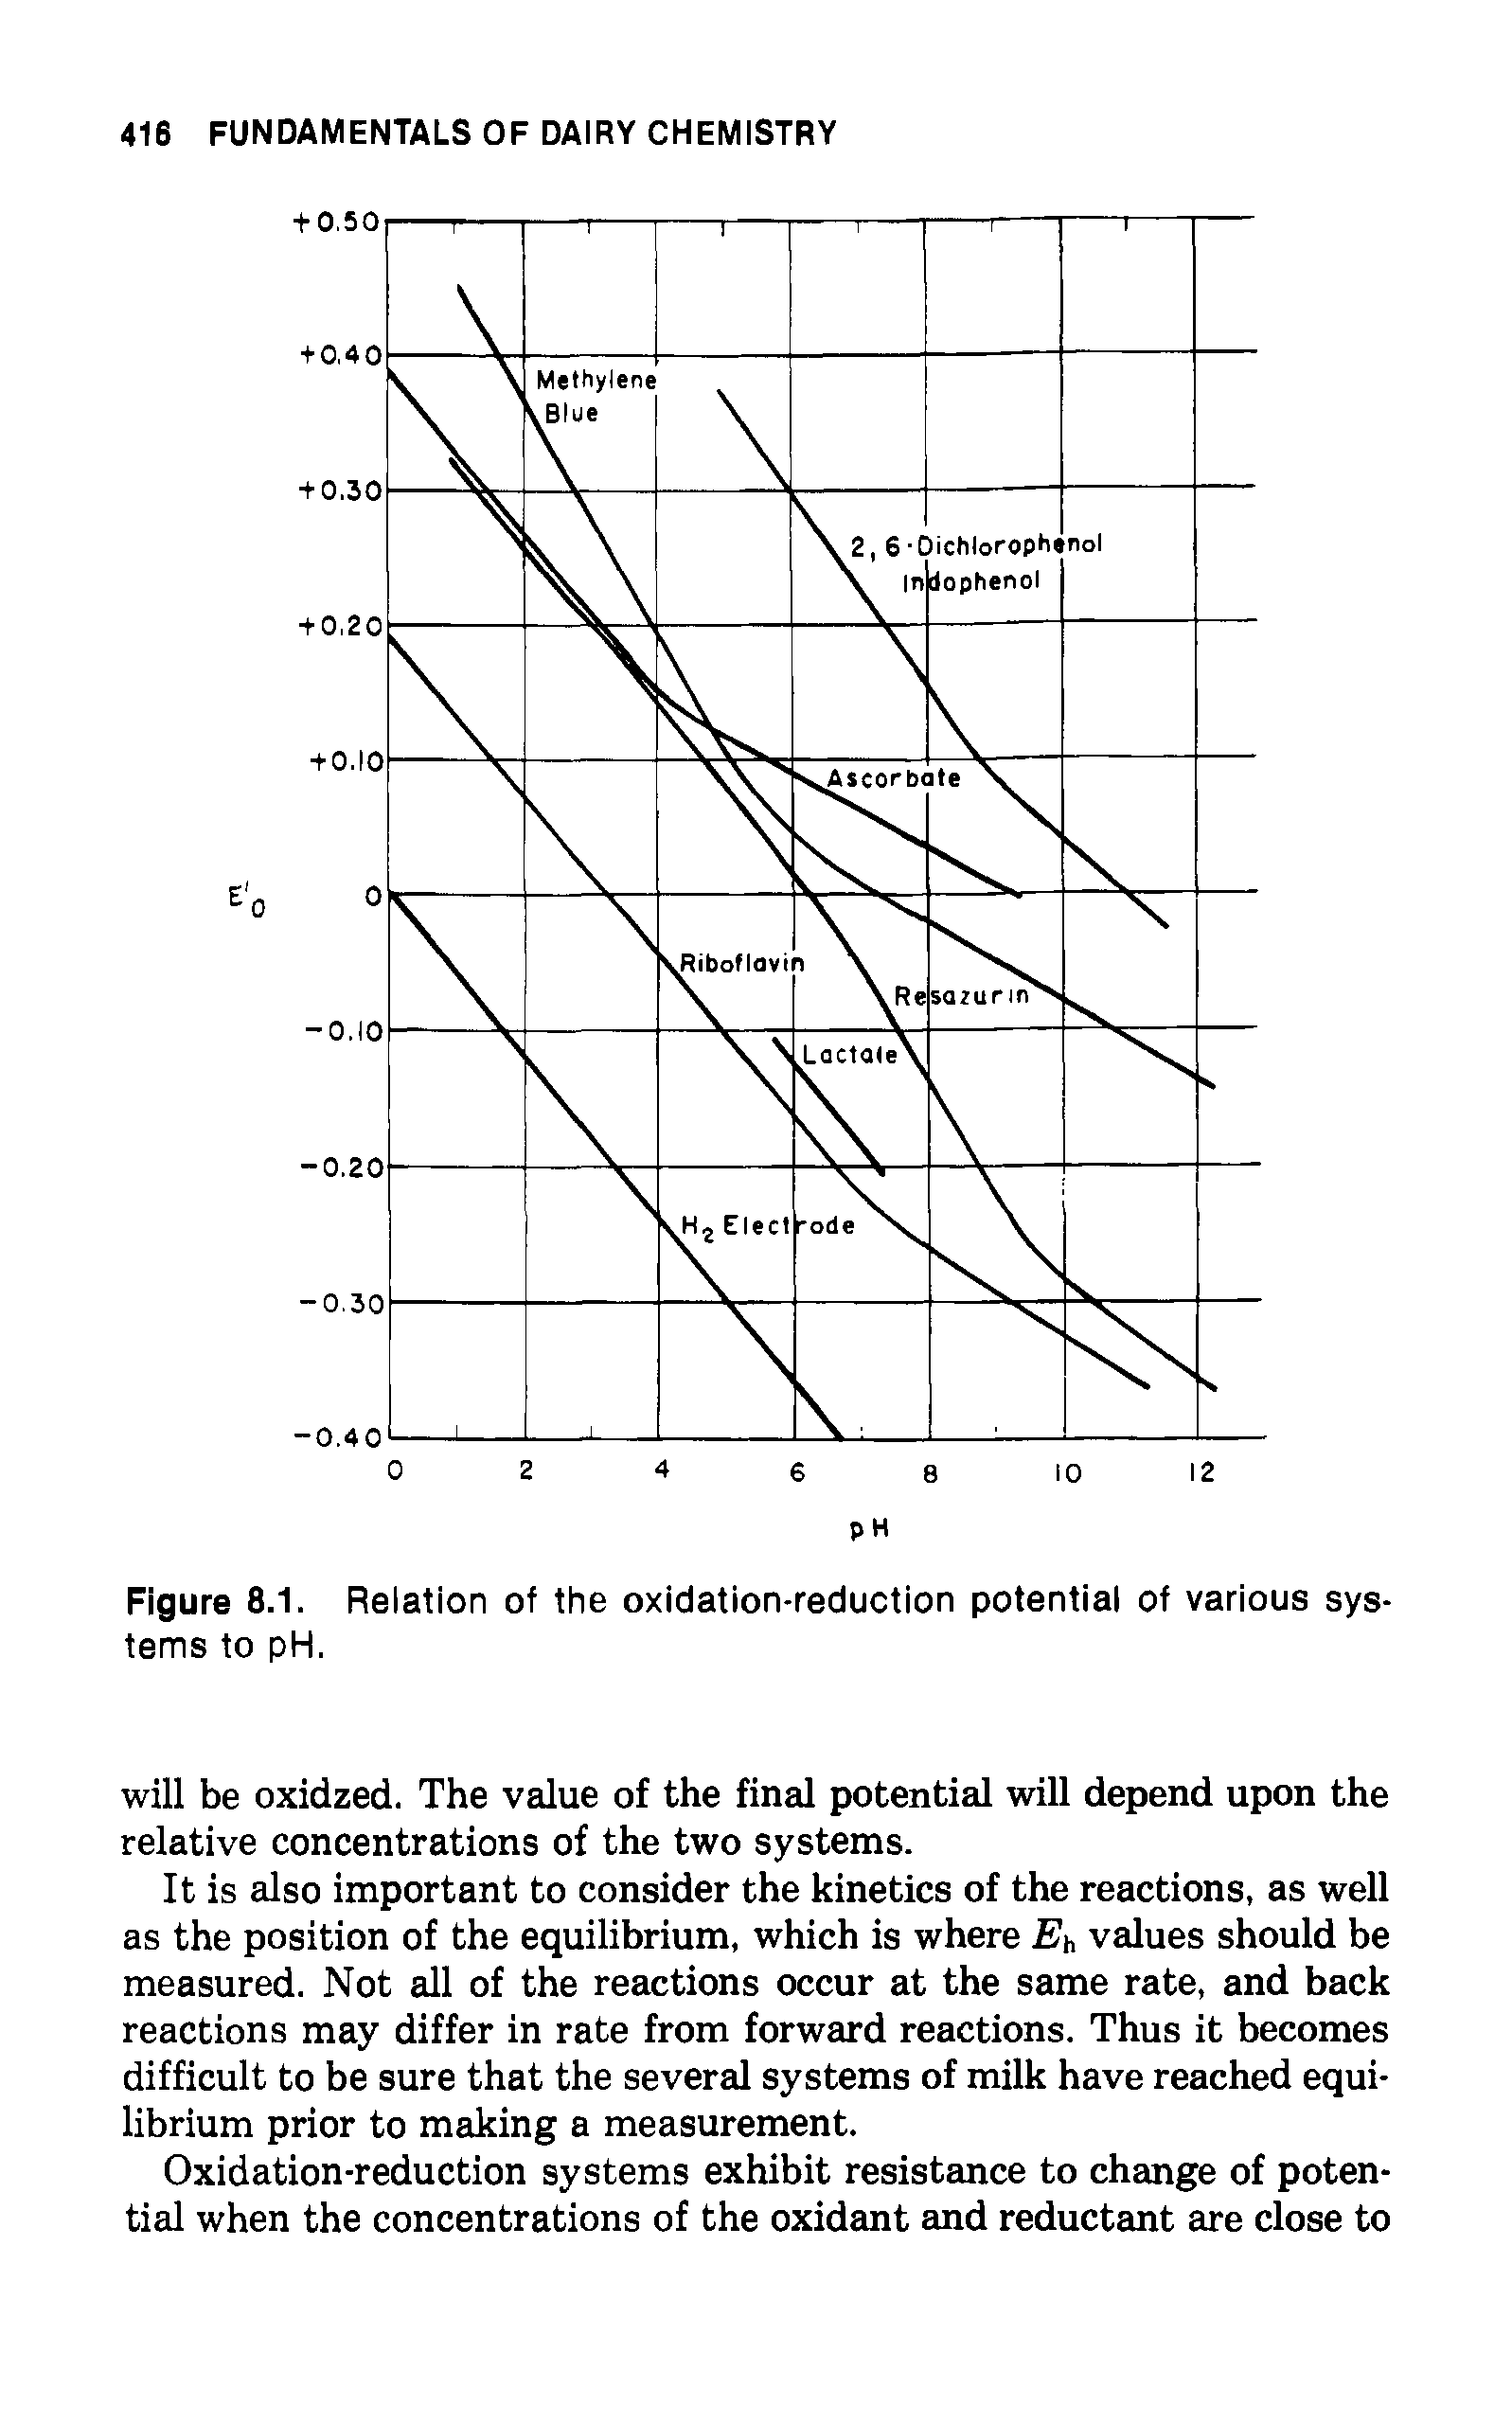 Figure 8.1. Relation of the oxidation-reduction potential of various systems to pH.